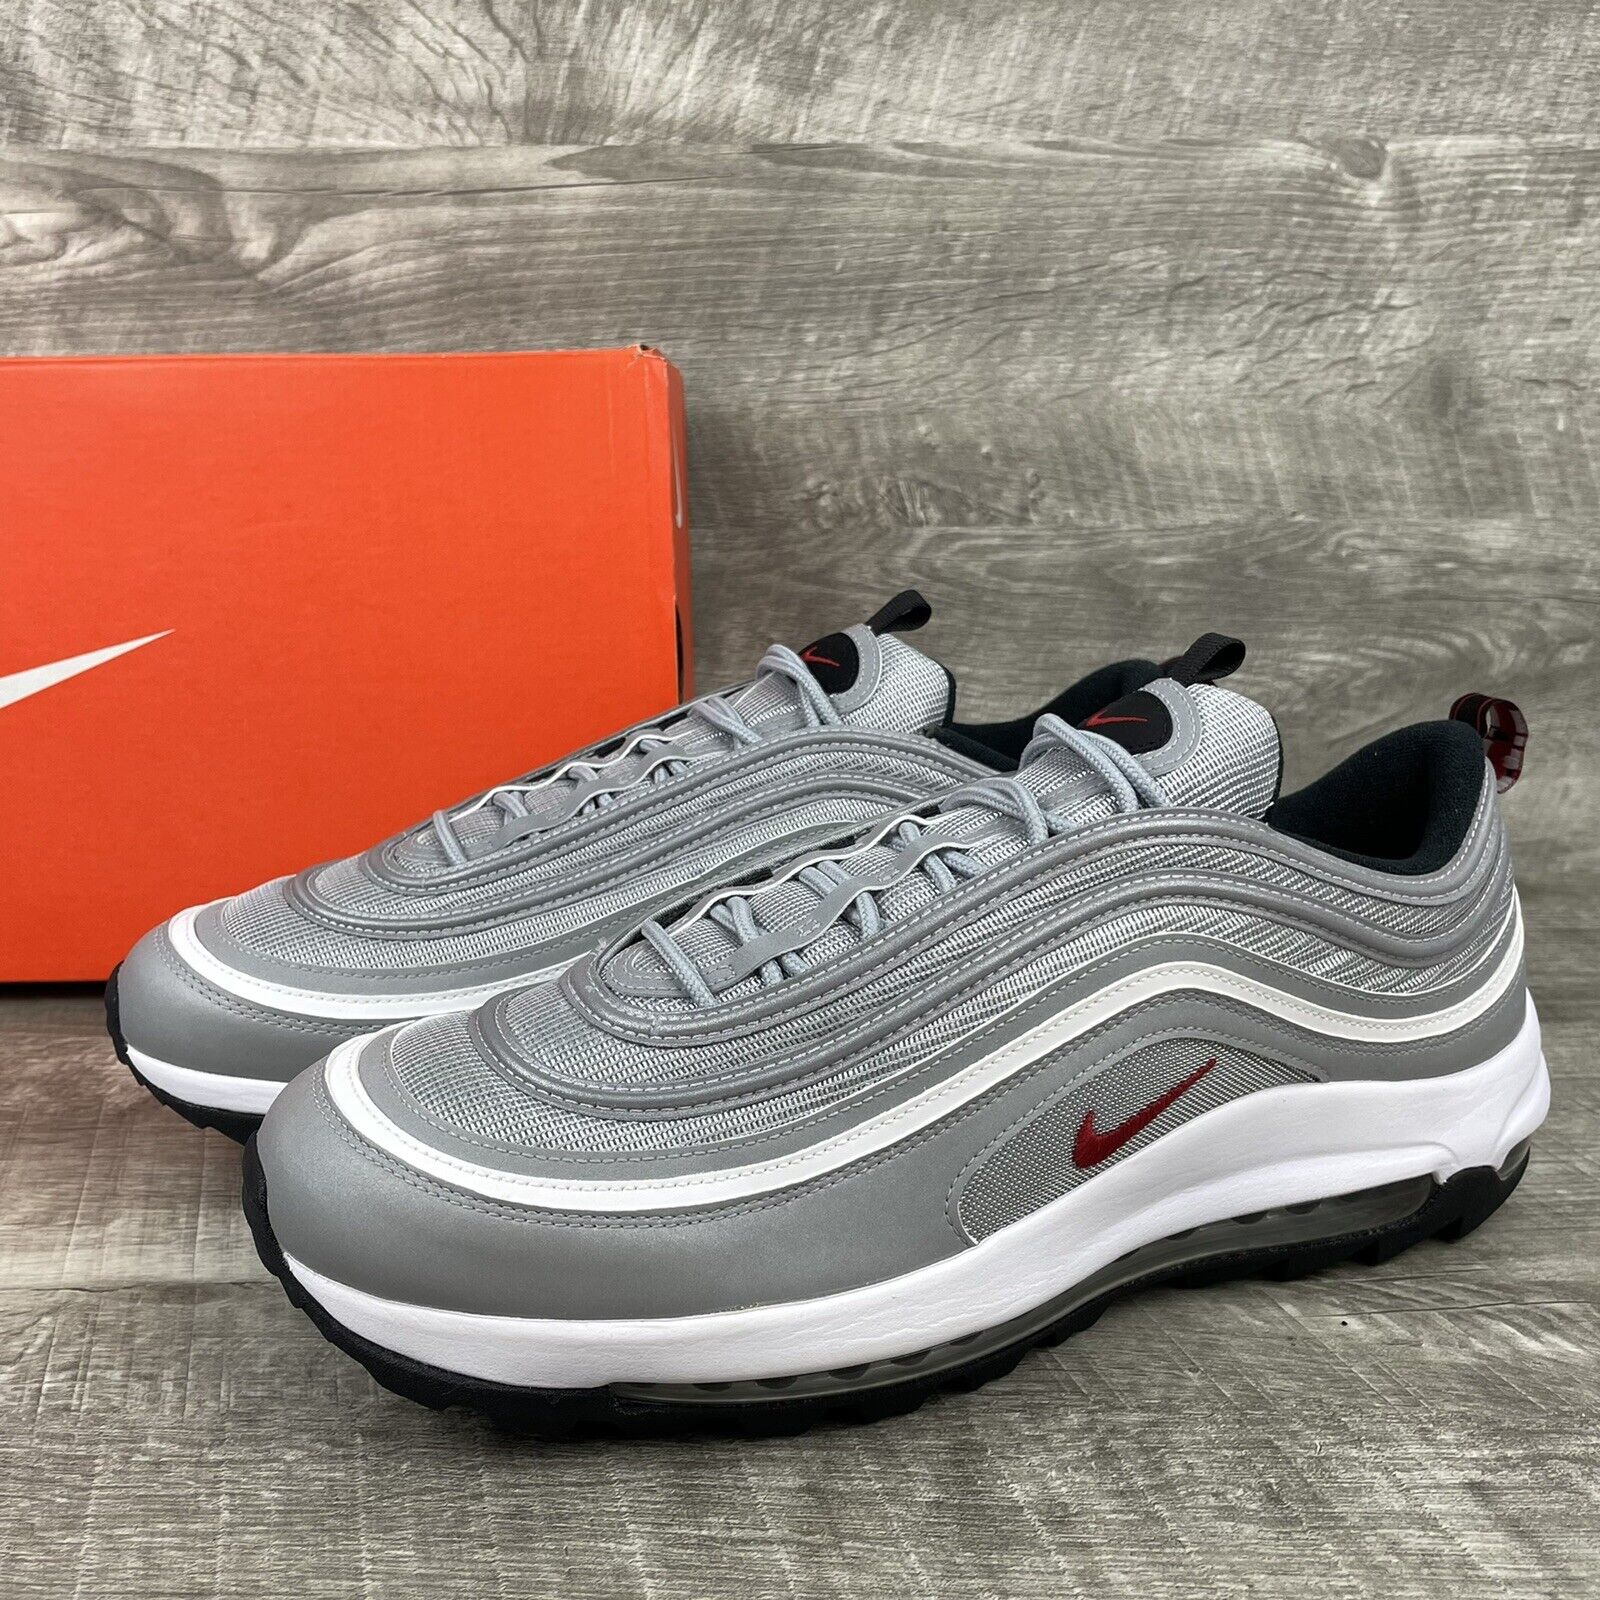 Nike Air Max 97 G Golf Silver Bullet CI7538-001 Men's Size 14 New 